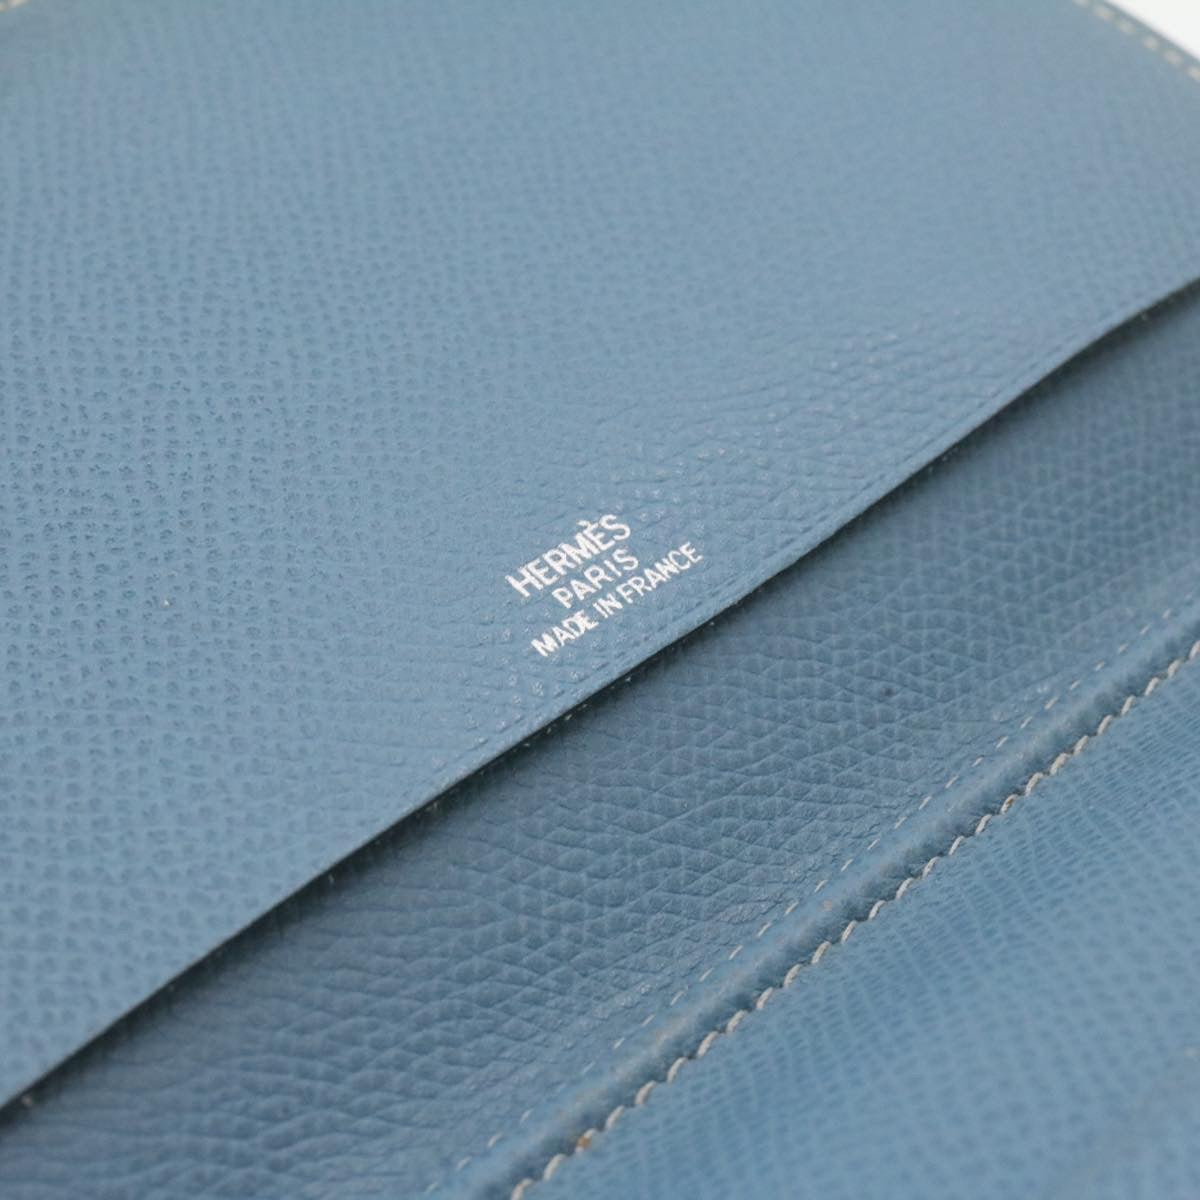 HERMES Agenda PM Day Planner Cover Leather Light Blue Auth ar3414